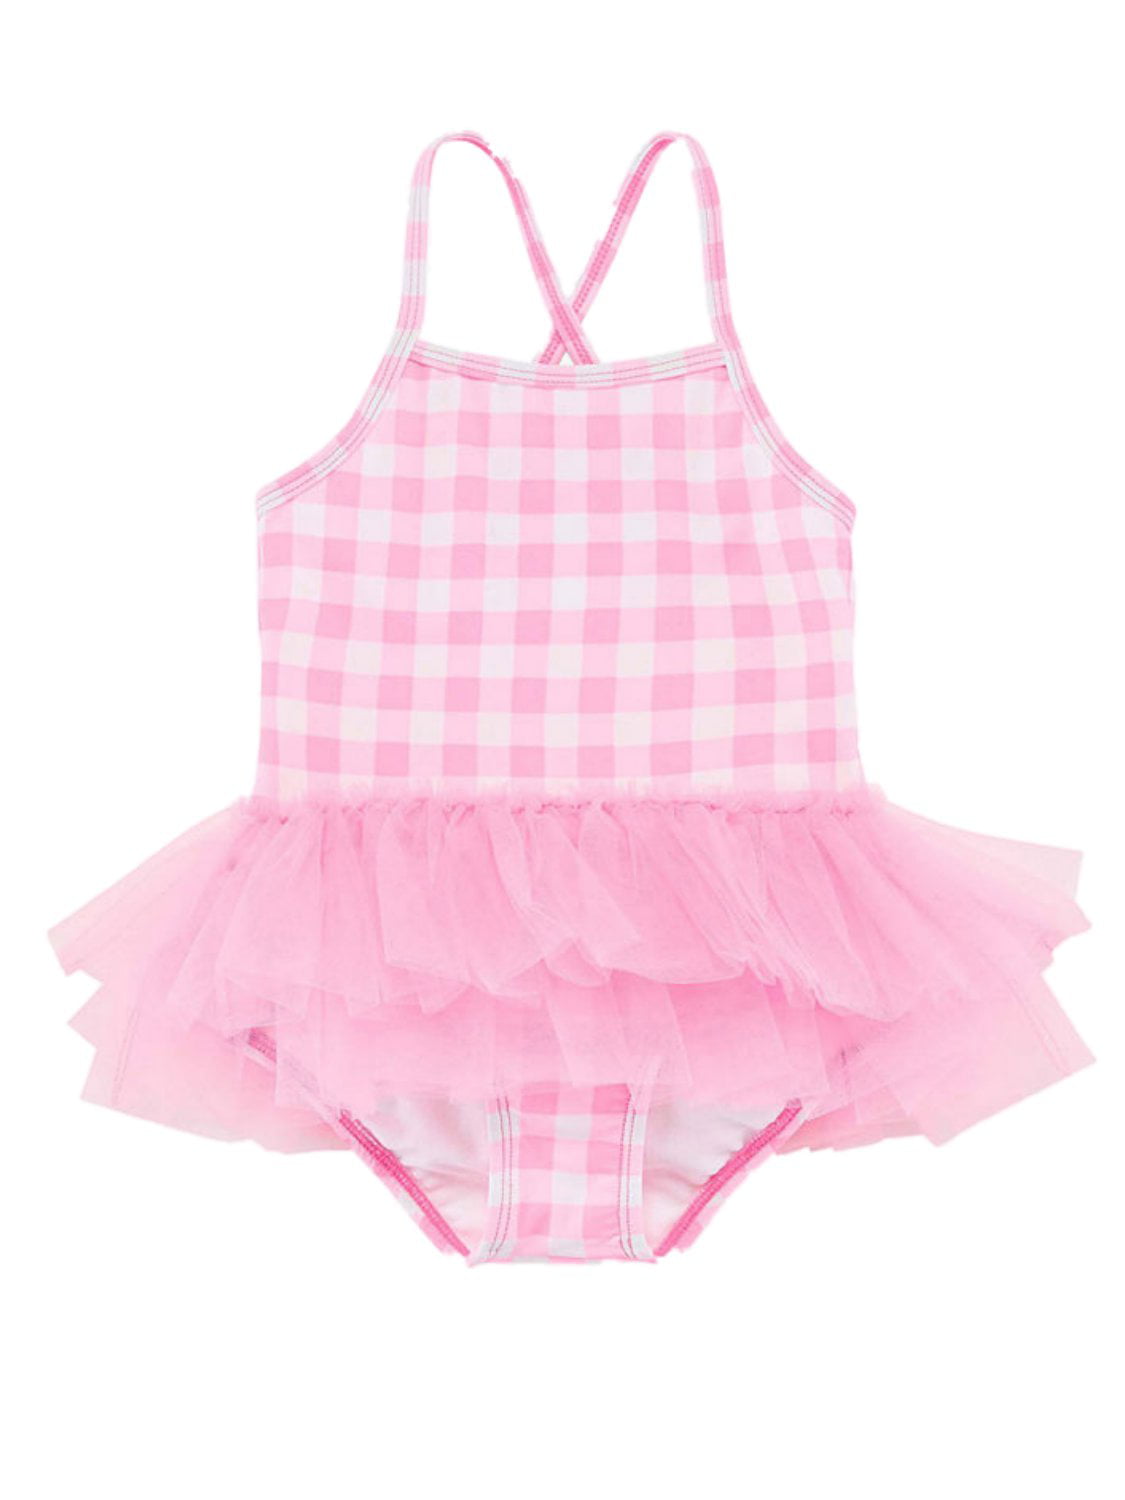 Details about   Okie Dokie One Piece Swimsuit Toddler Girls Size 3T New 